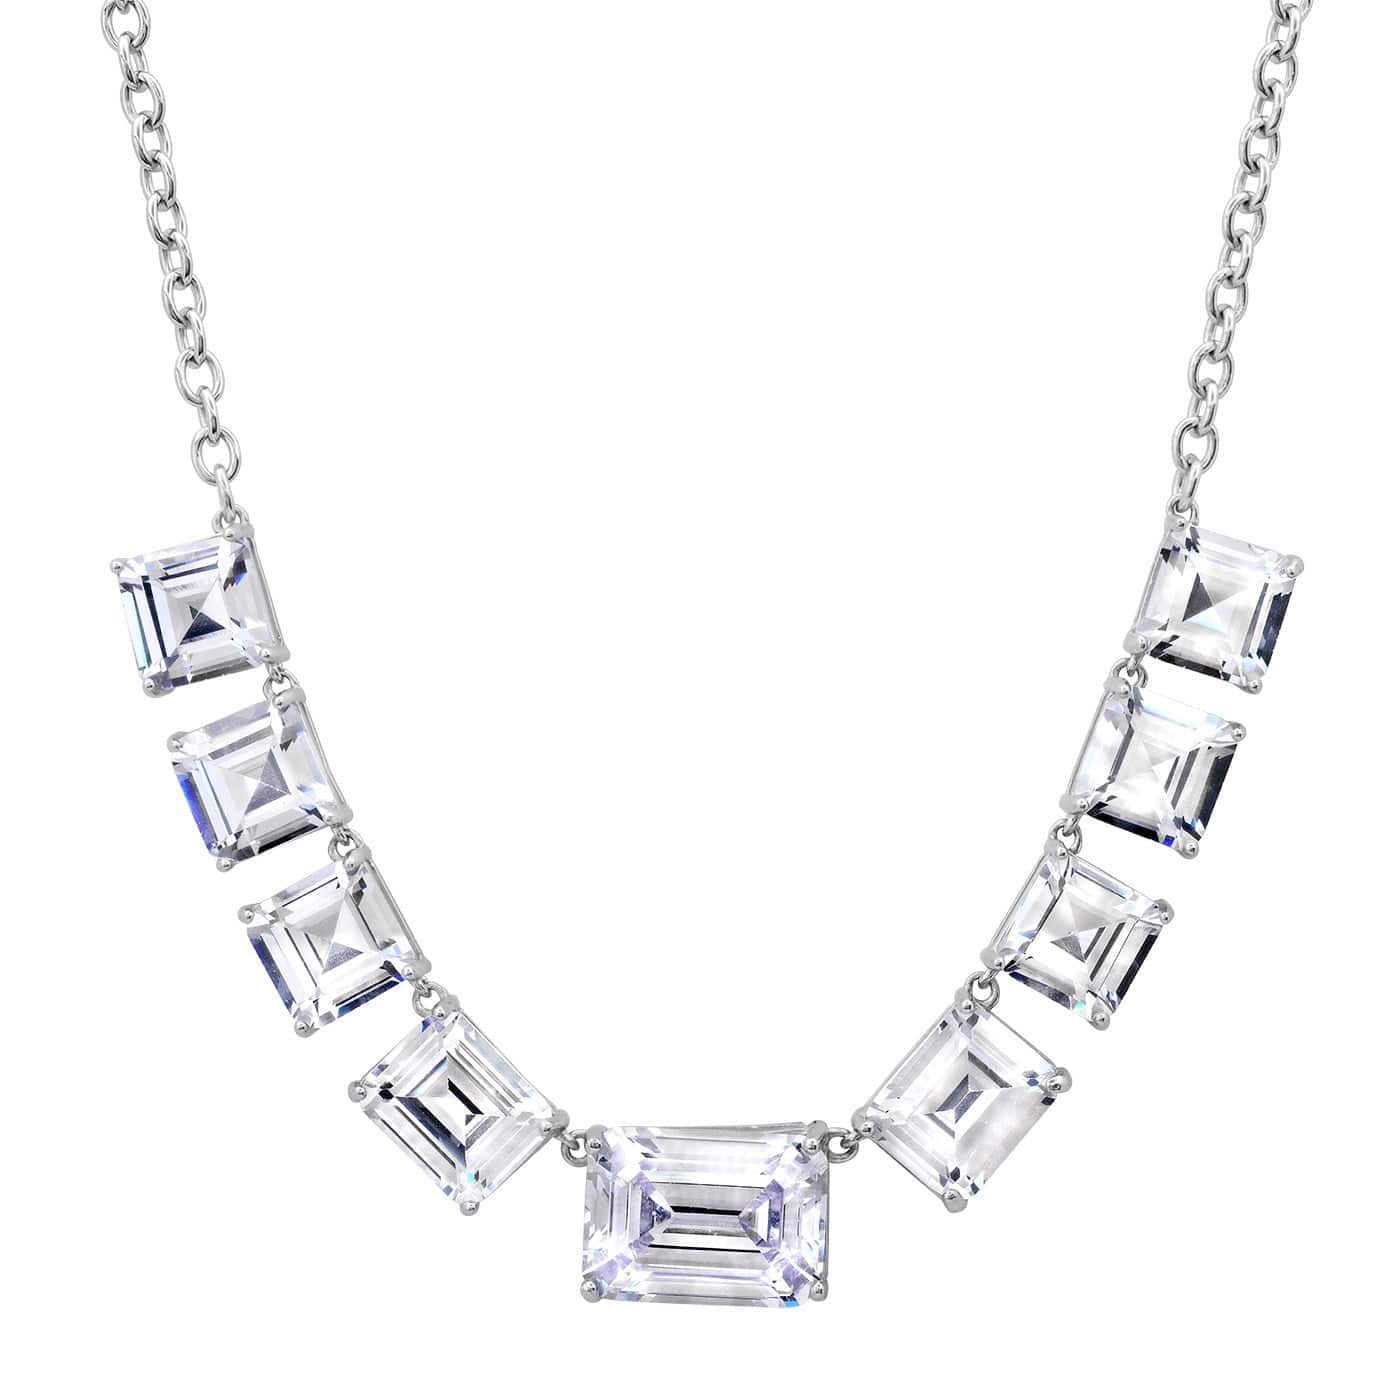 TAI JEWELRY Necklace SS/CL Chunky Emerald Cut Glass Stone Necklace